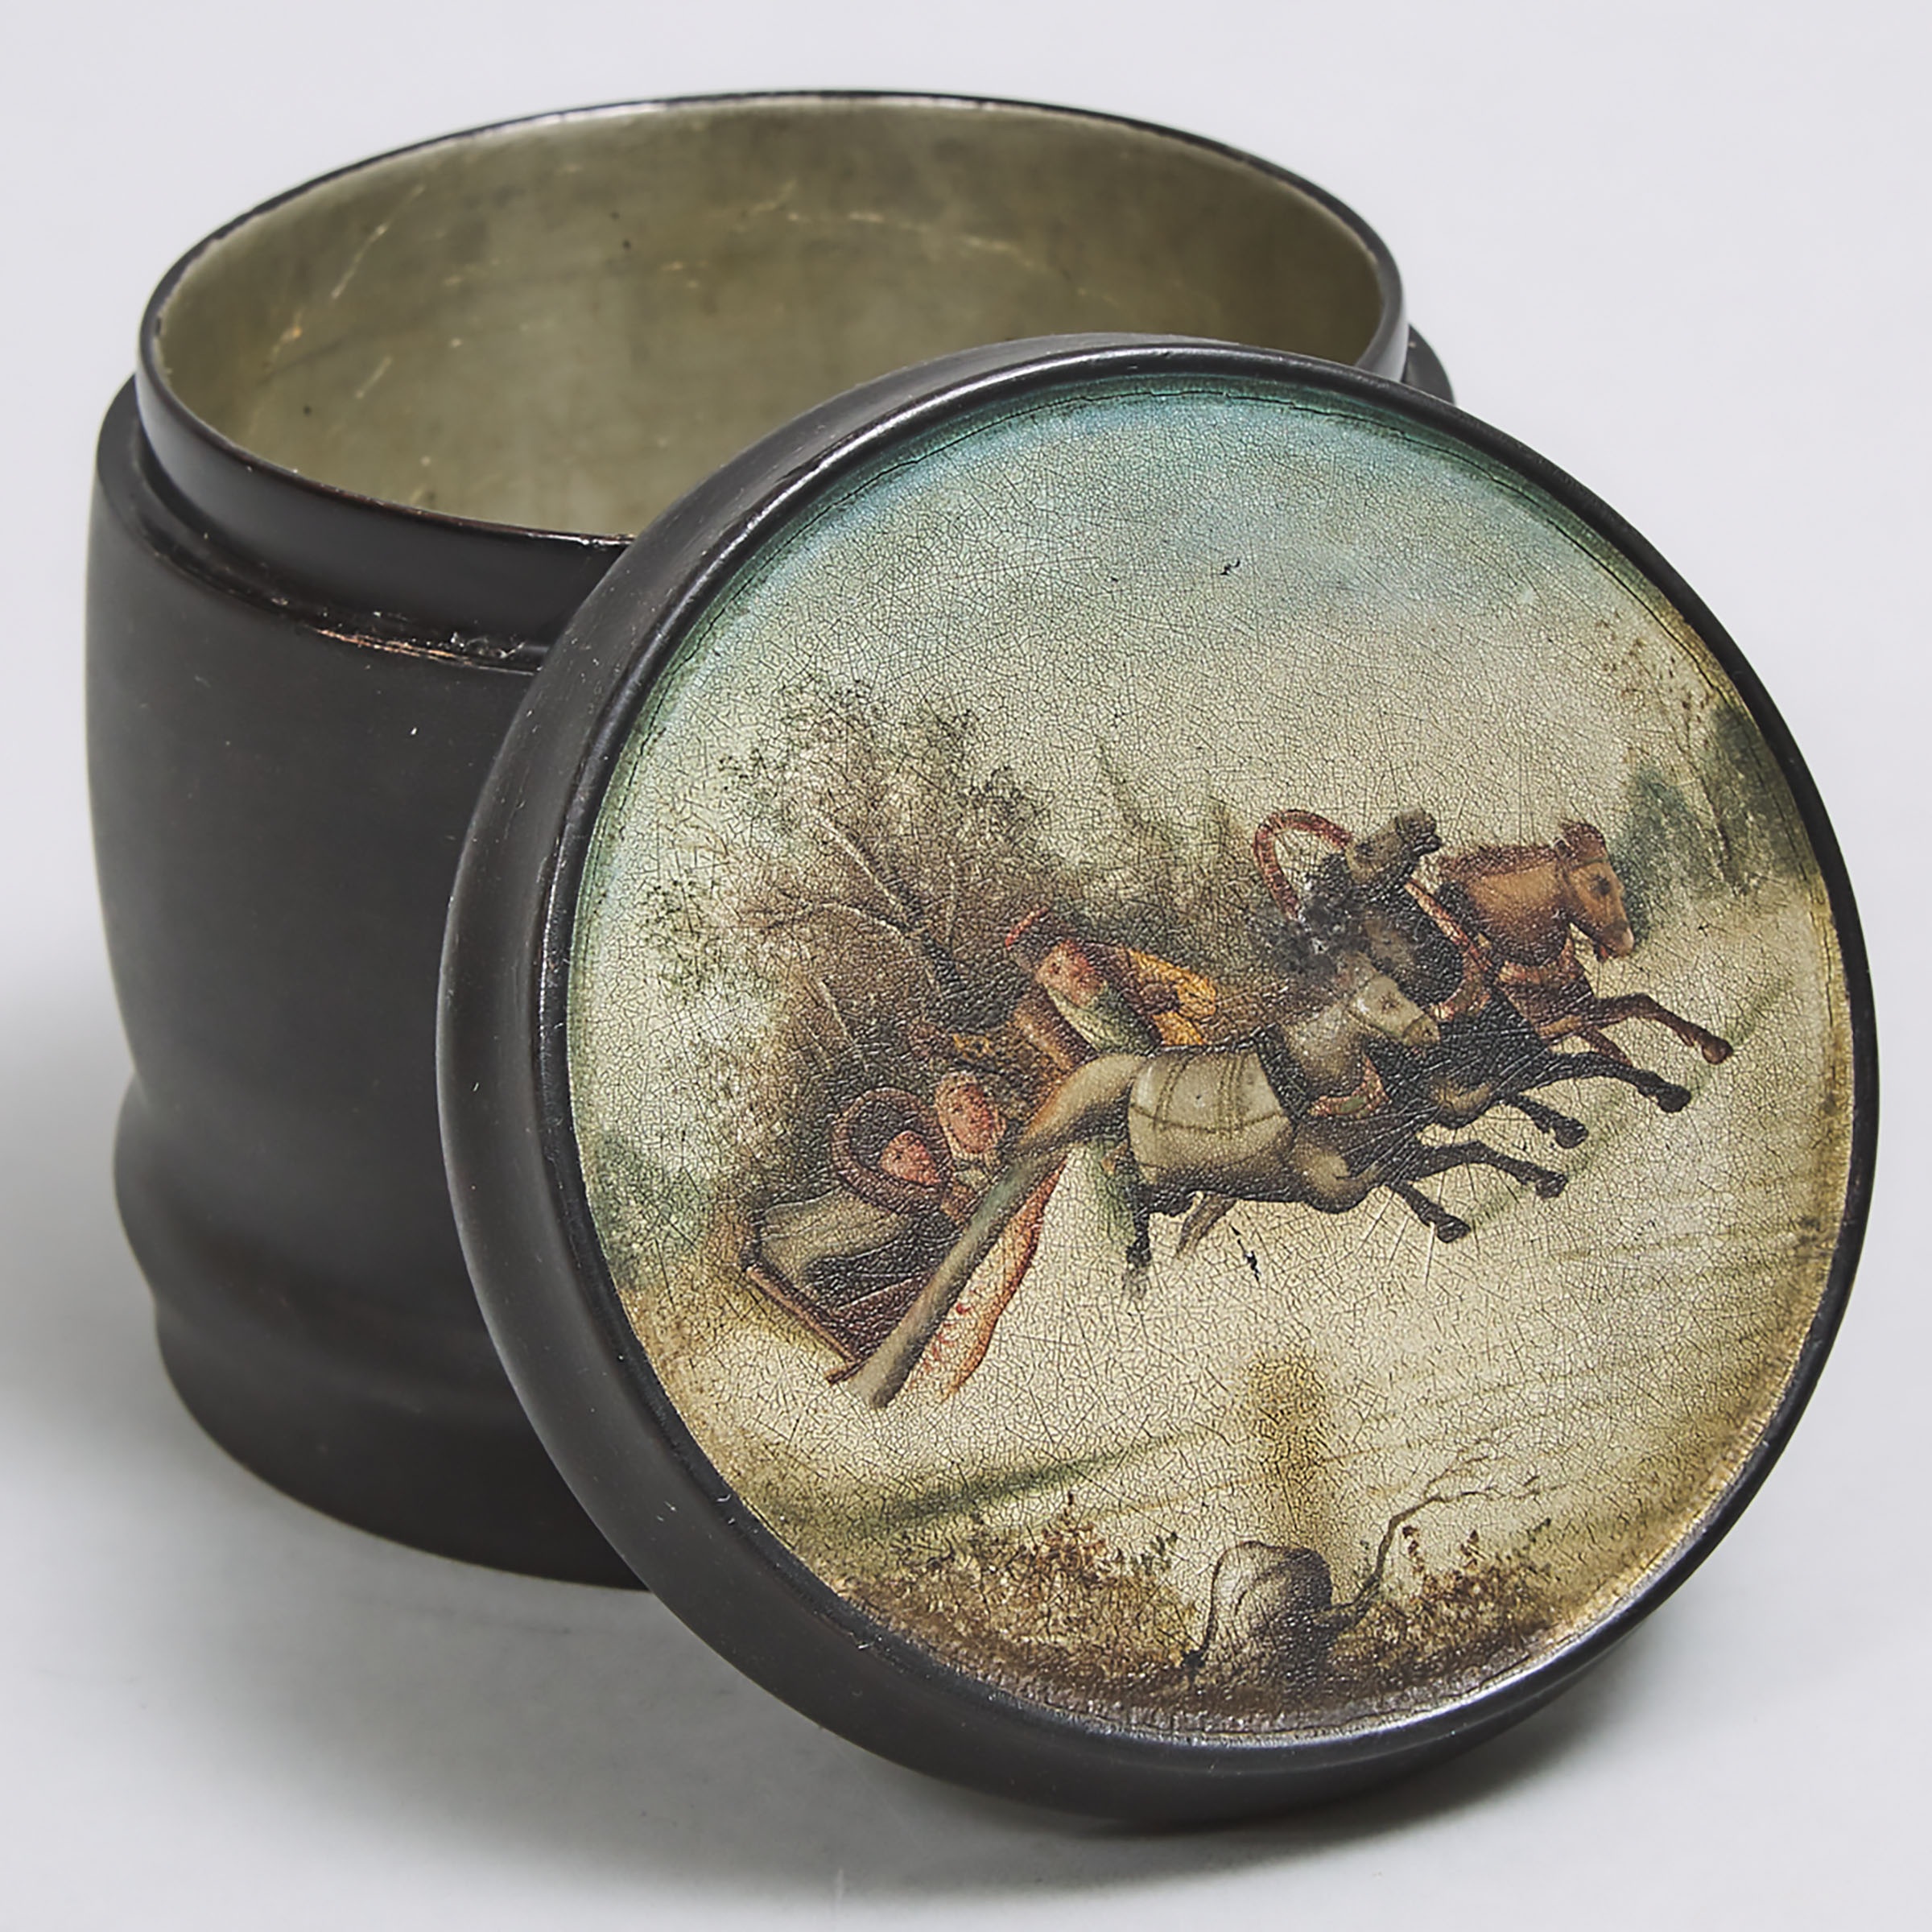 Russian Palekh Lacquer Tobacco Canister, c.1900